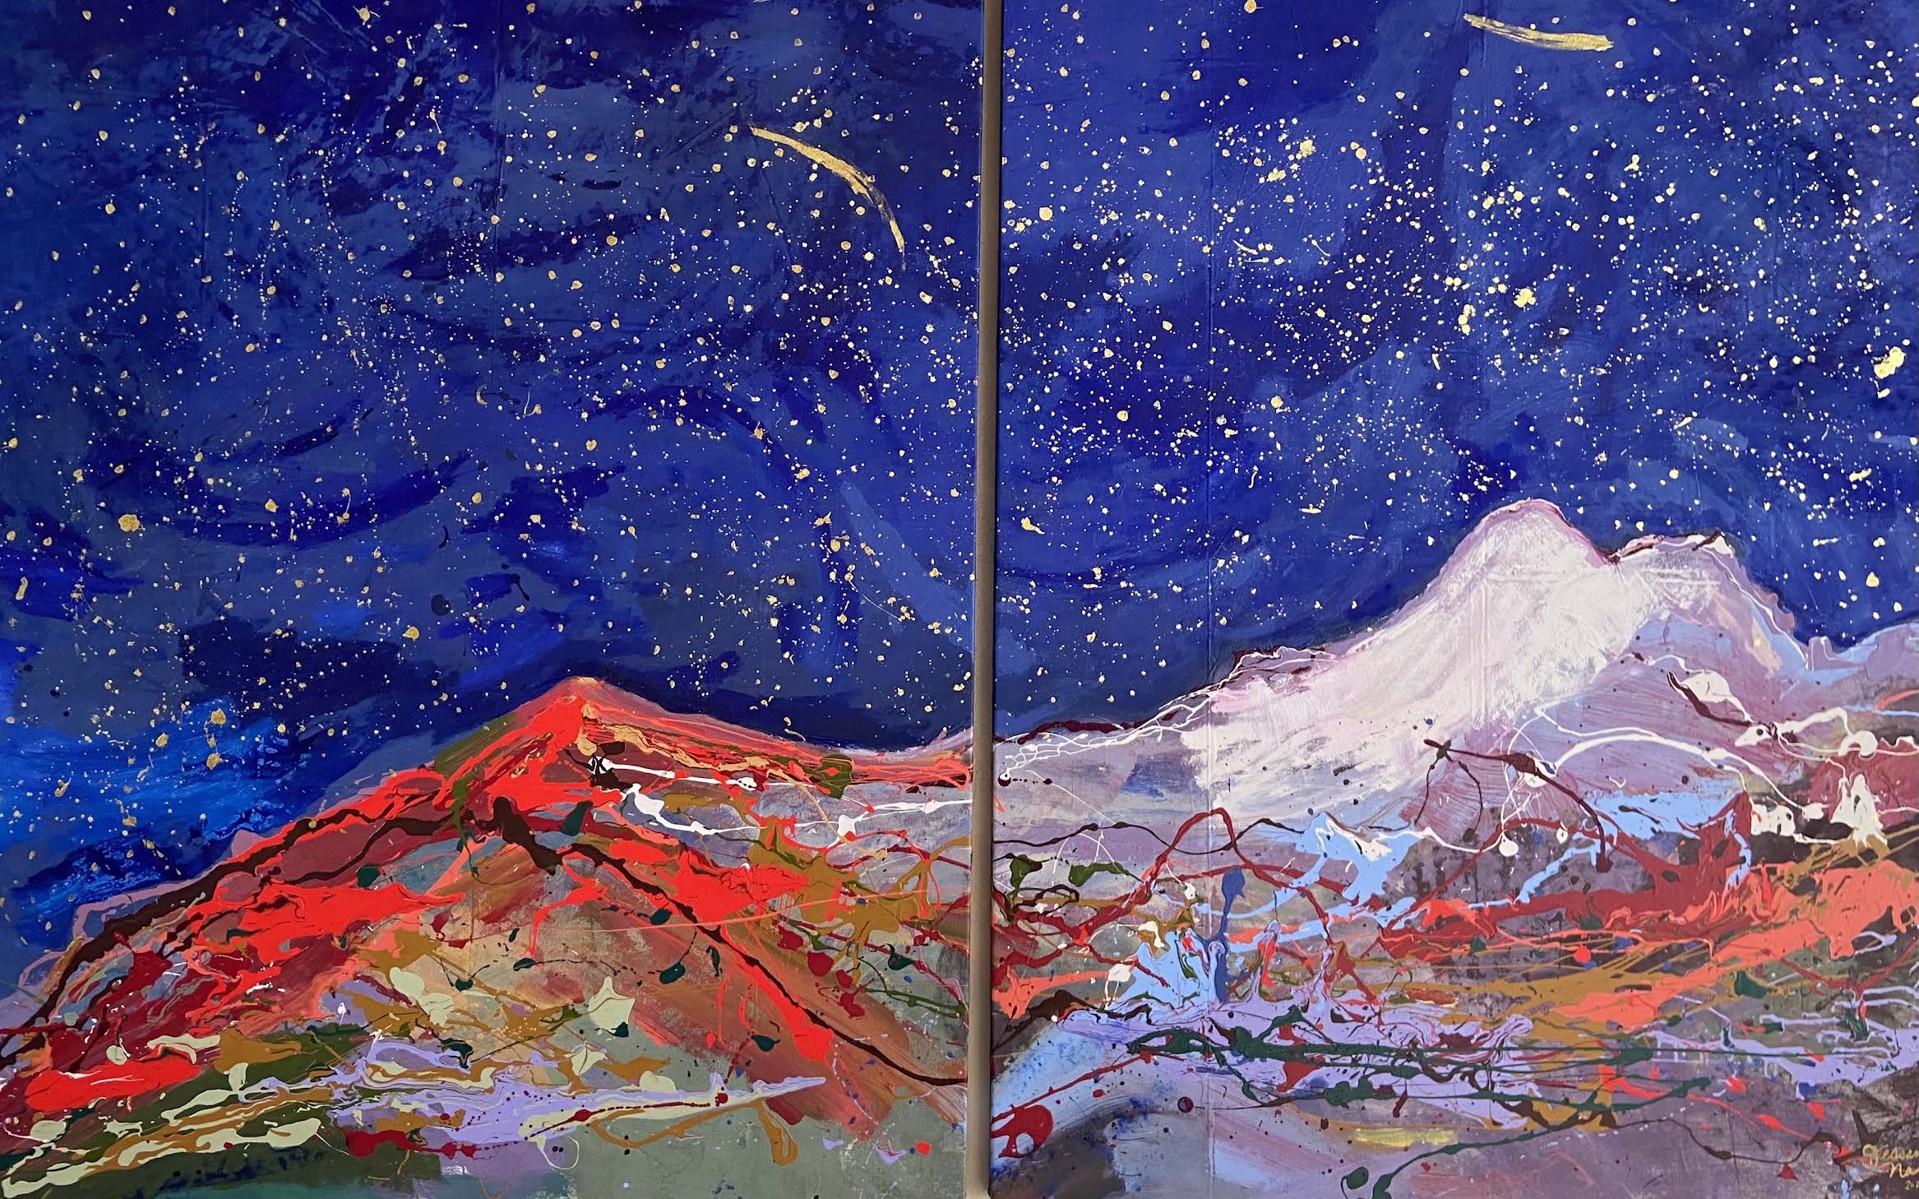 Snow On The Mountain, Stars In the Sky by Jessamine Narita